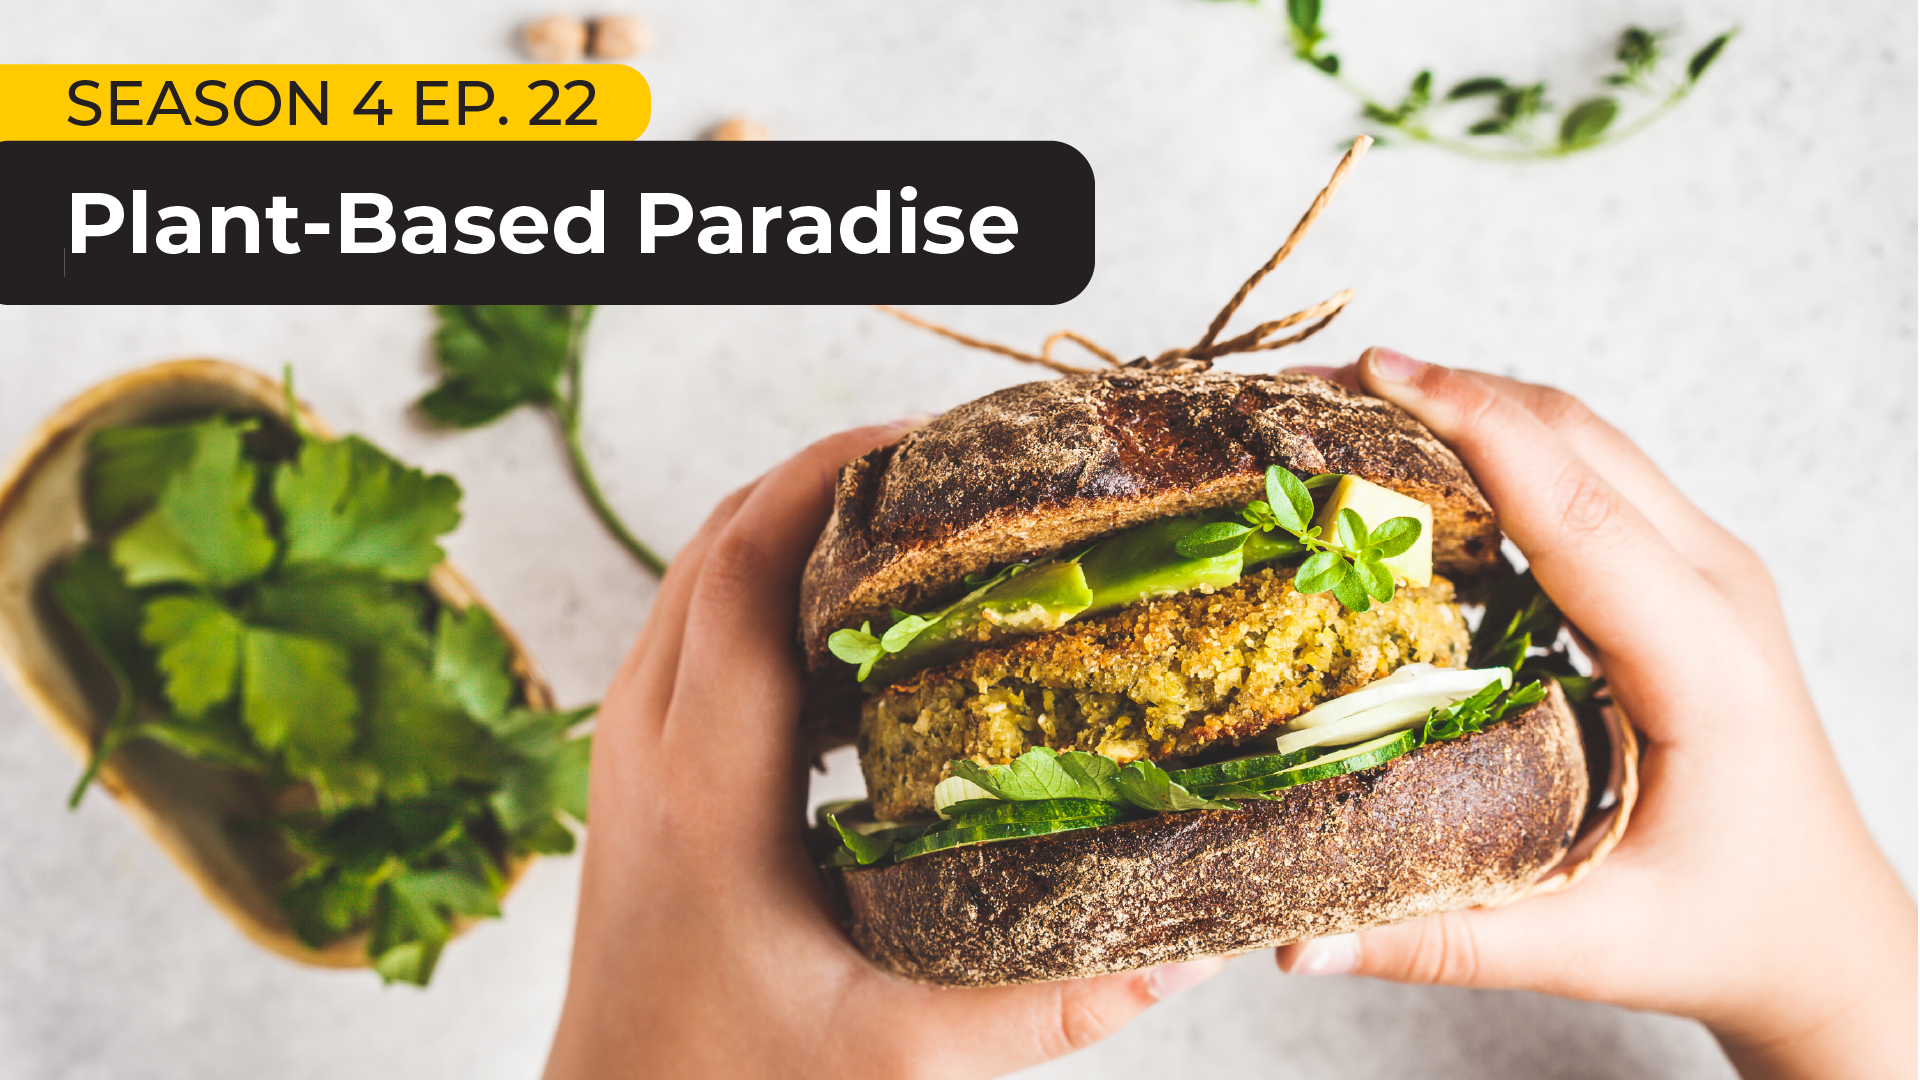 From myriad analogues to plant-forward menu innovation, plant-based products dominating retail shelves to fruit and veggie menu heroes, plant power took over the industry in a flash. But is plant-based still the powerhouse it once was?